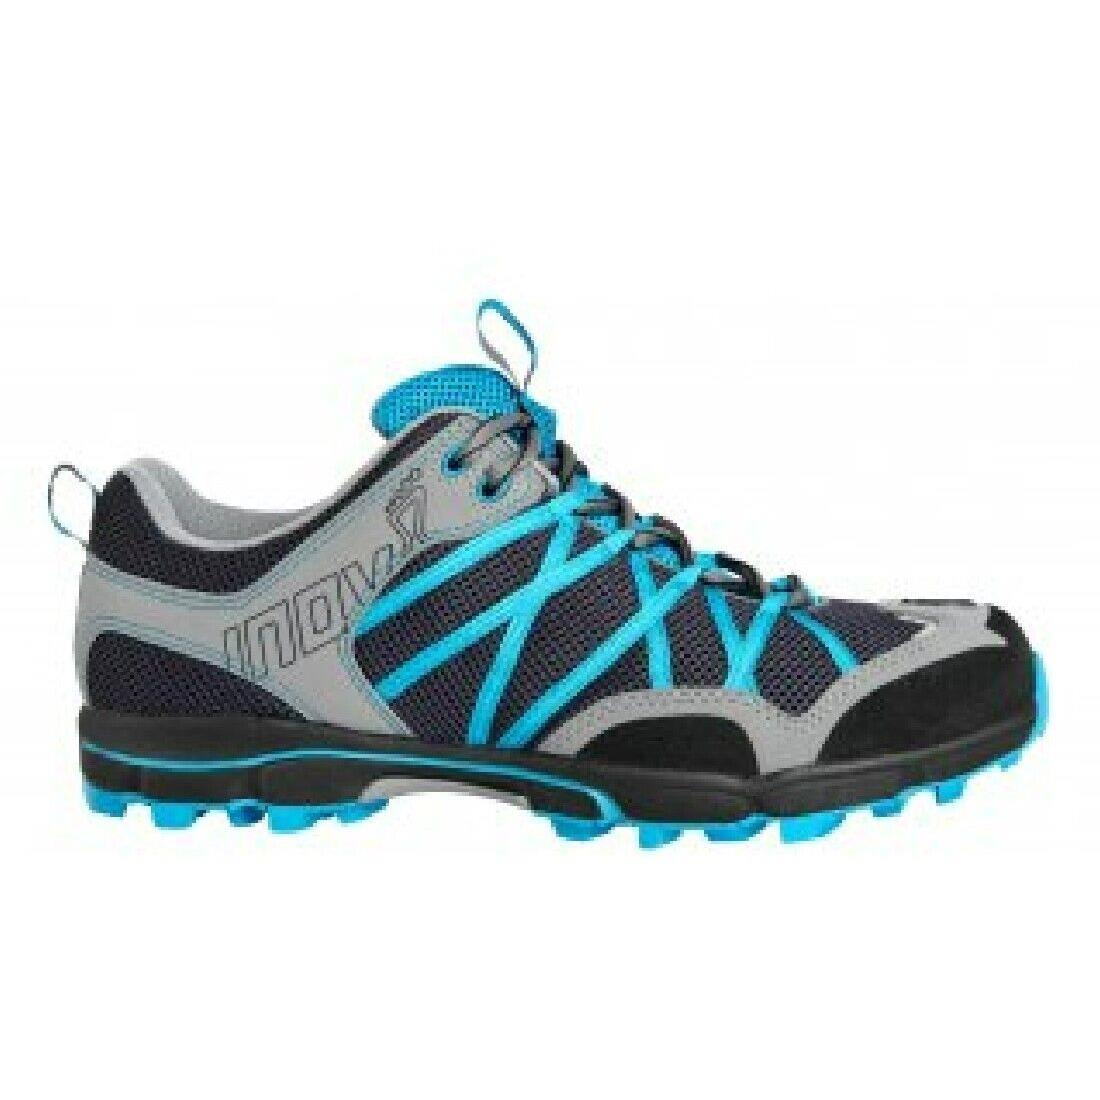 Inov 8 Roclite 268 Women`s Trail Running and Walking Shoes Grey/blue Size 4.5